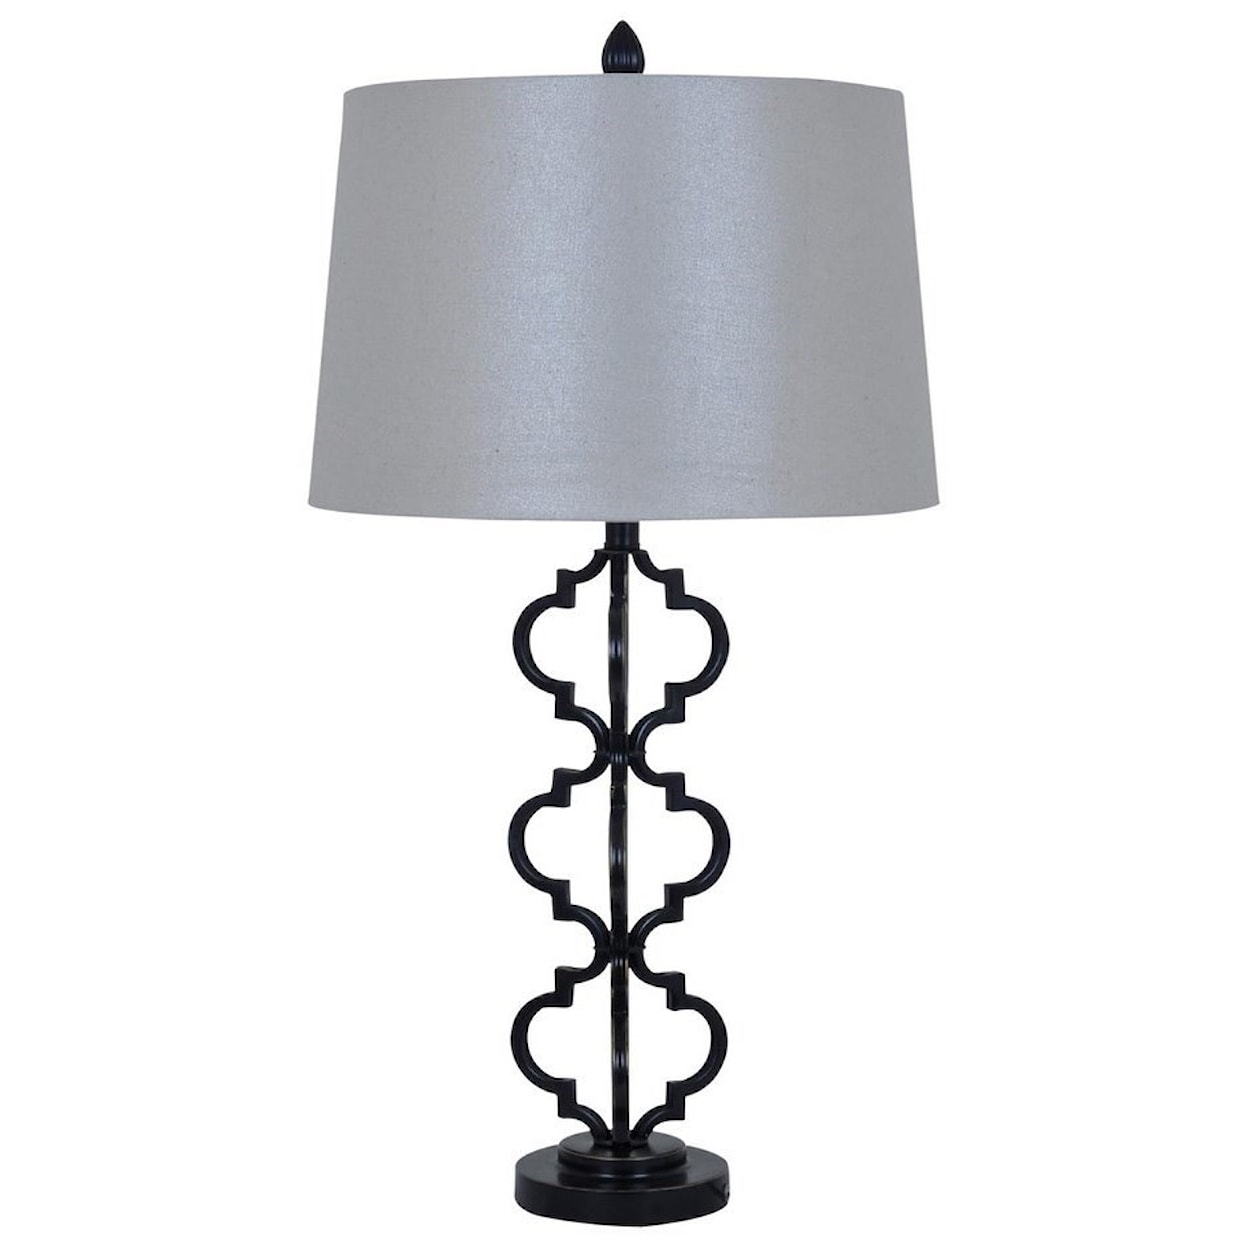 Crestview Collection Lighting Parisian Table Lamp